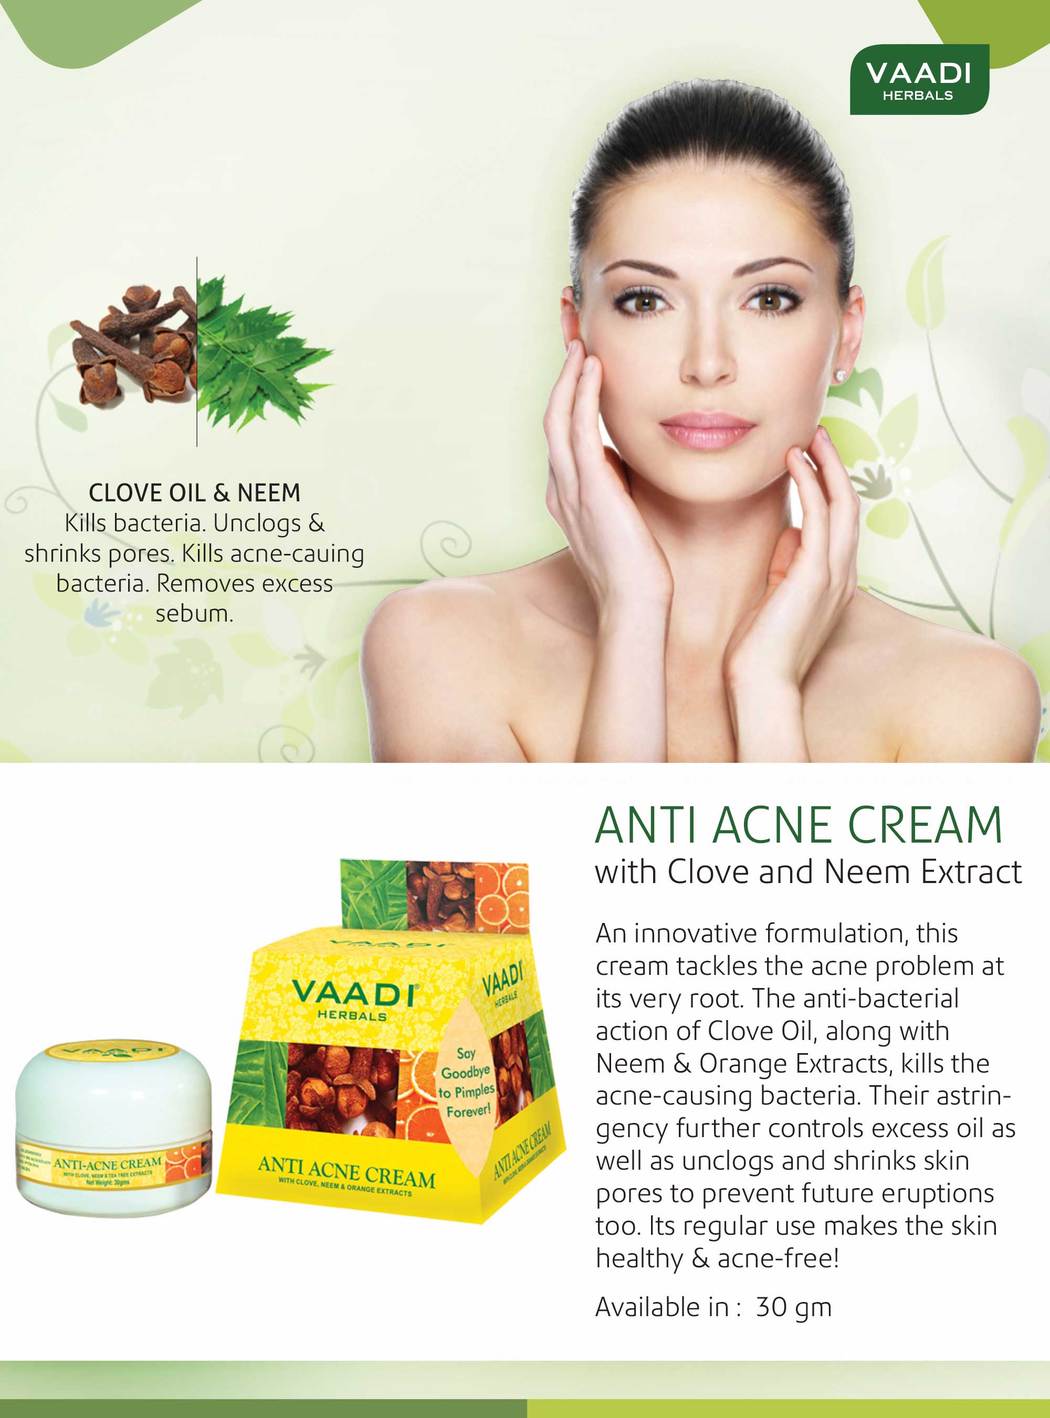 Anti Acne Organic Cream with Clove Oil & Neem Extract - Anti Bacterial Therapy - Controls Excess Oil - Prevents Acne (3 x 30 gms / 1.1 oz)